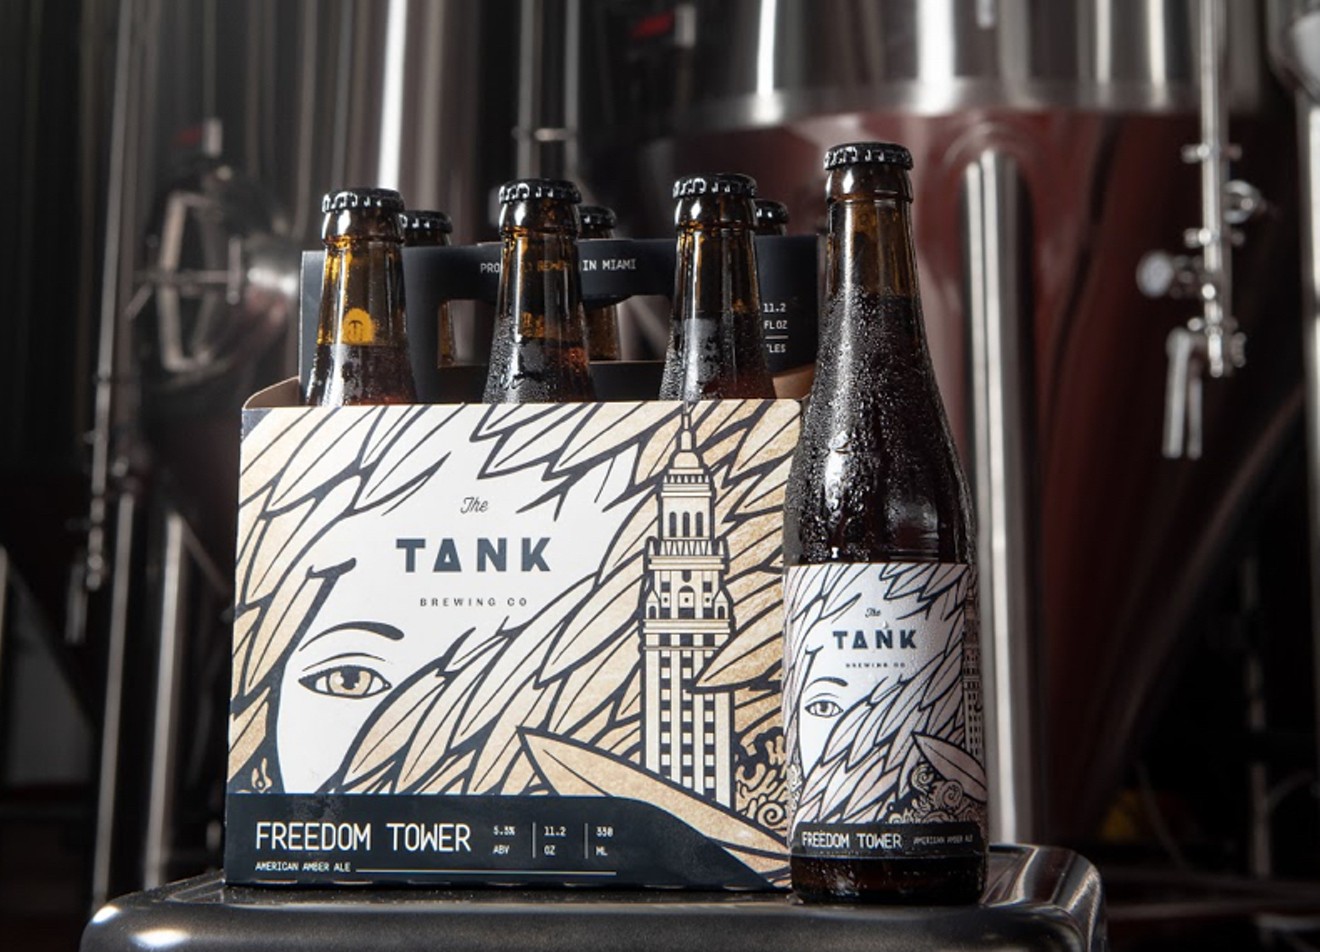 The Tank's Freedom Tower Amber Ale is now available in bottles.